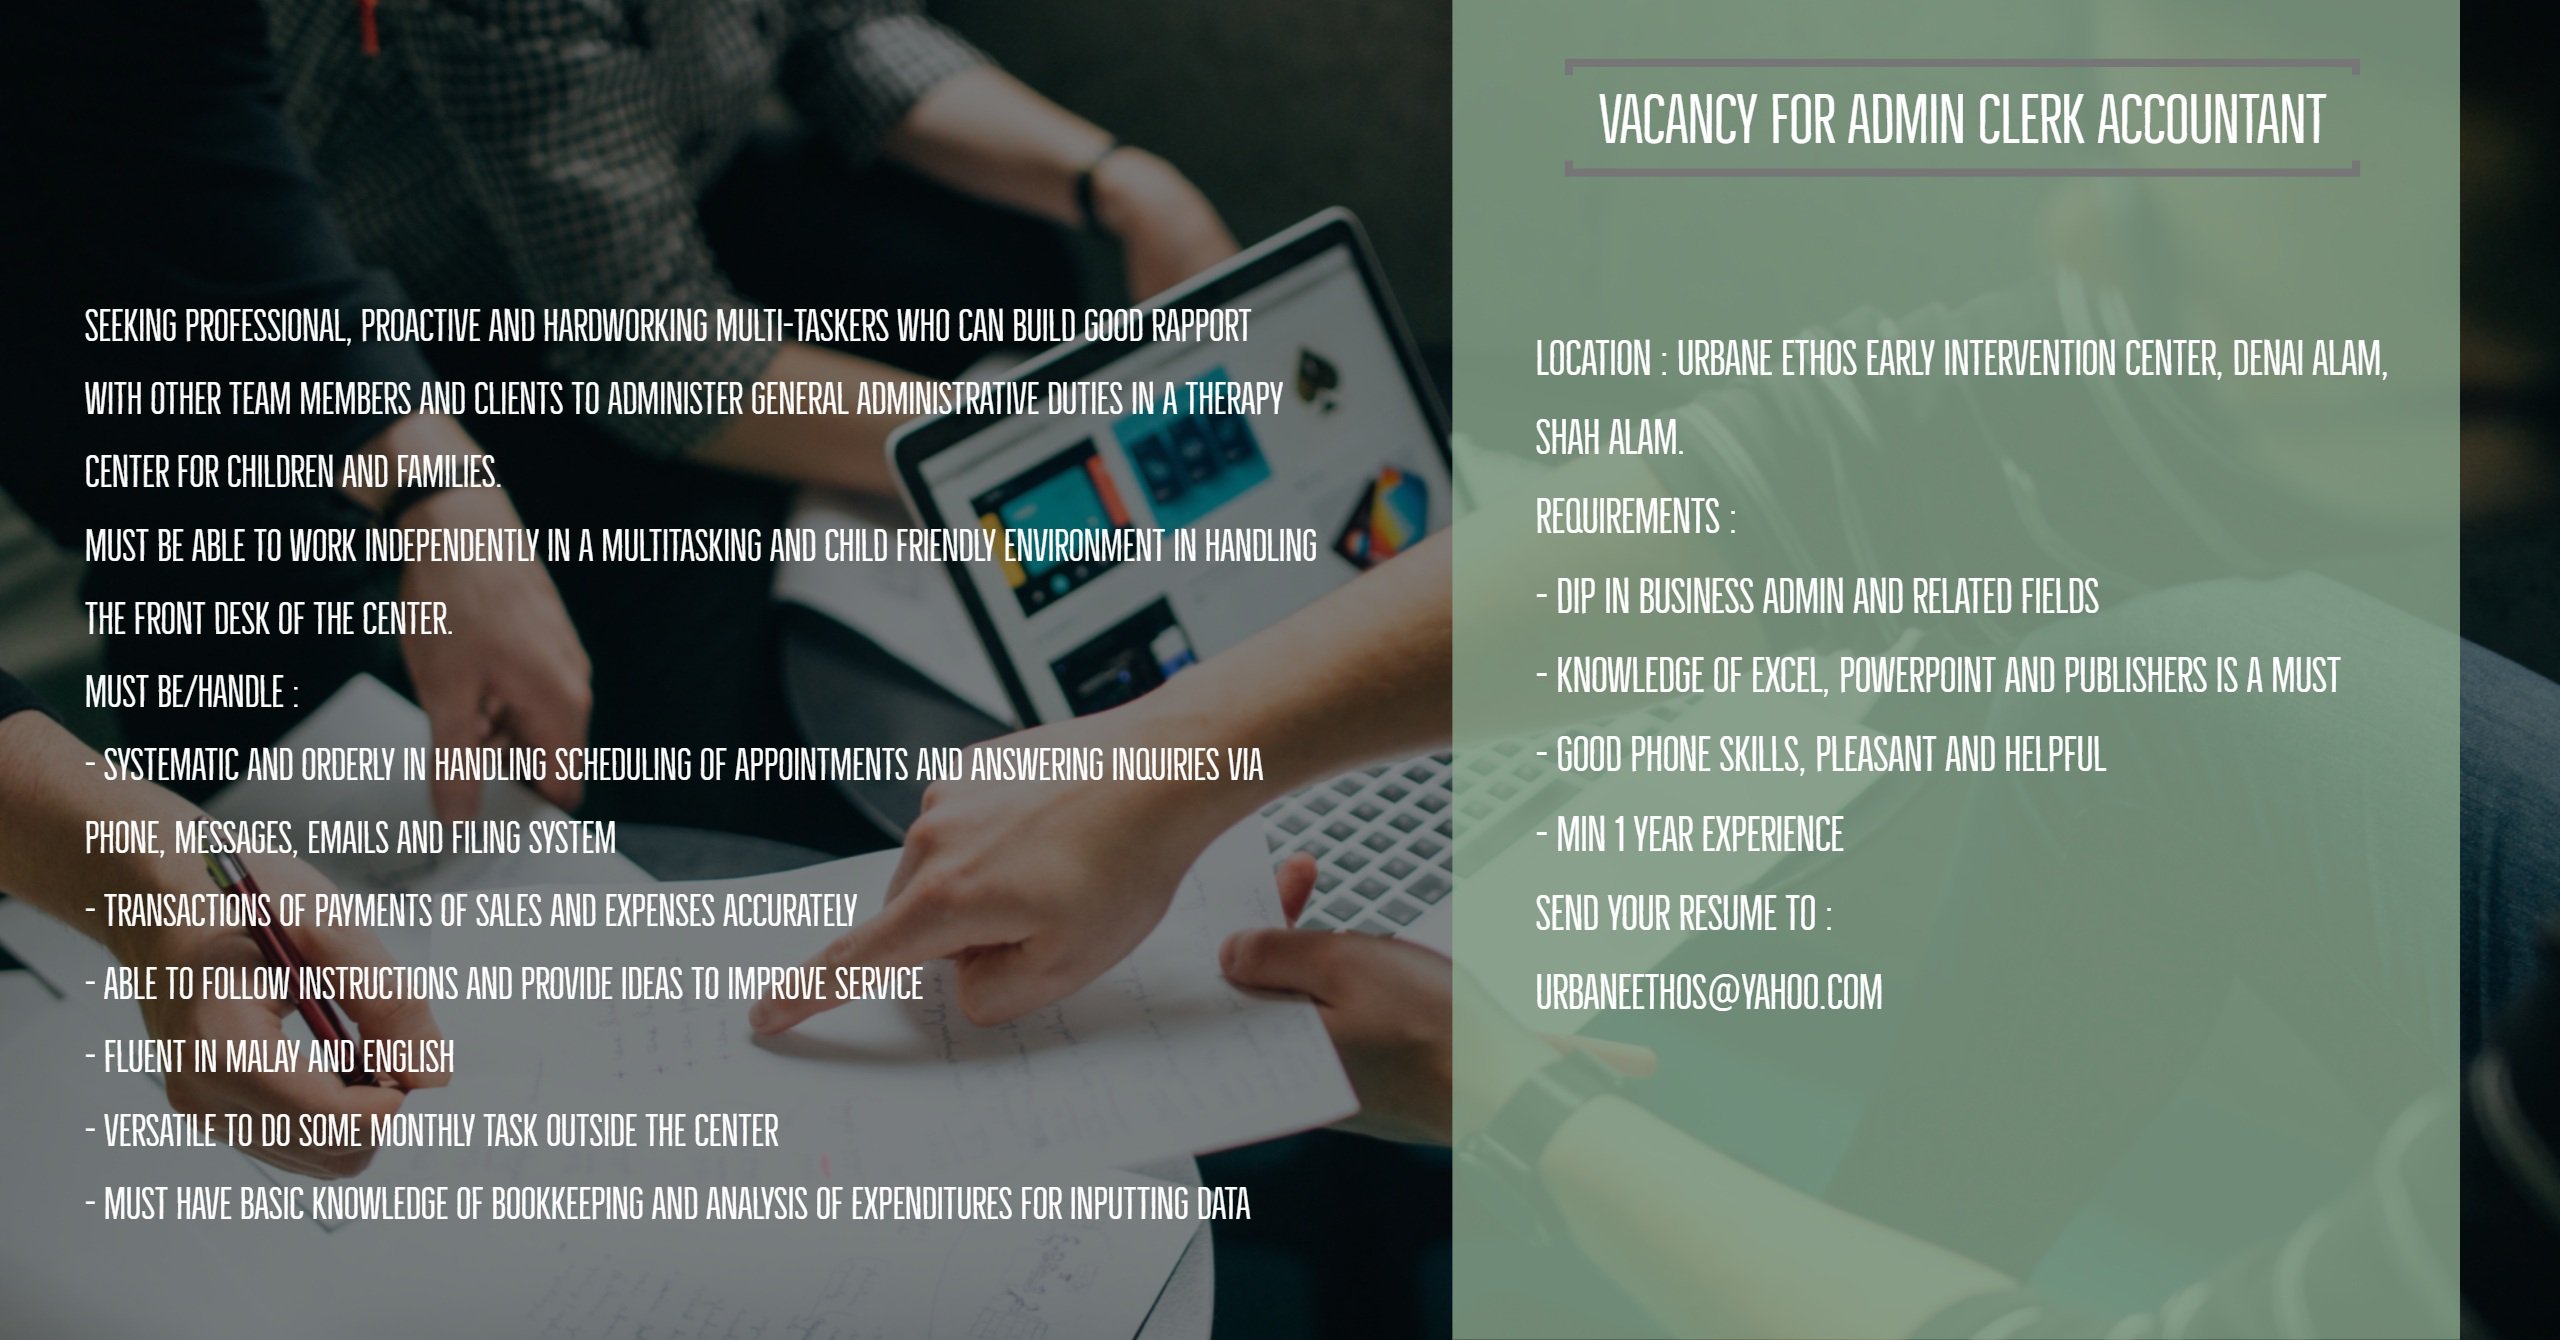 Urbane Ethos On Twitter Urgent Vacancy For The Position Of Admin Clerk Accountant Location Denai Alam Shah Alam Salary 1 75k To 2 K Negotiable Must Have Own Transportation Friendly Pleasant